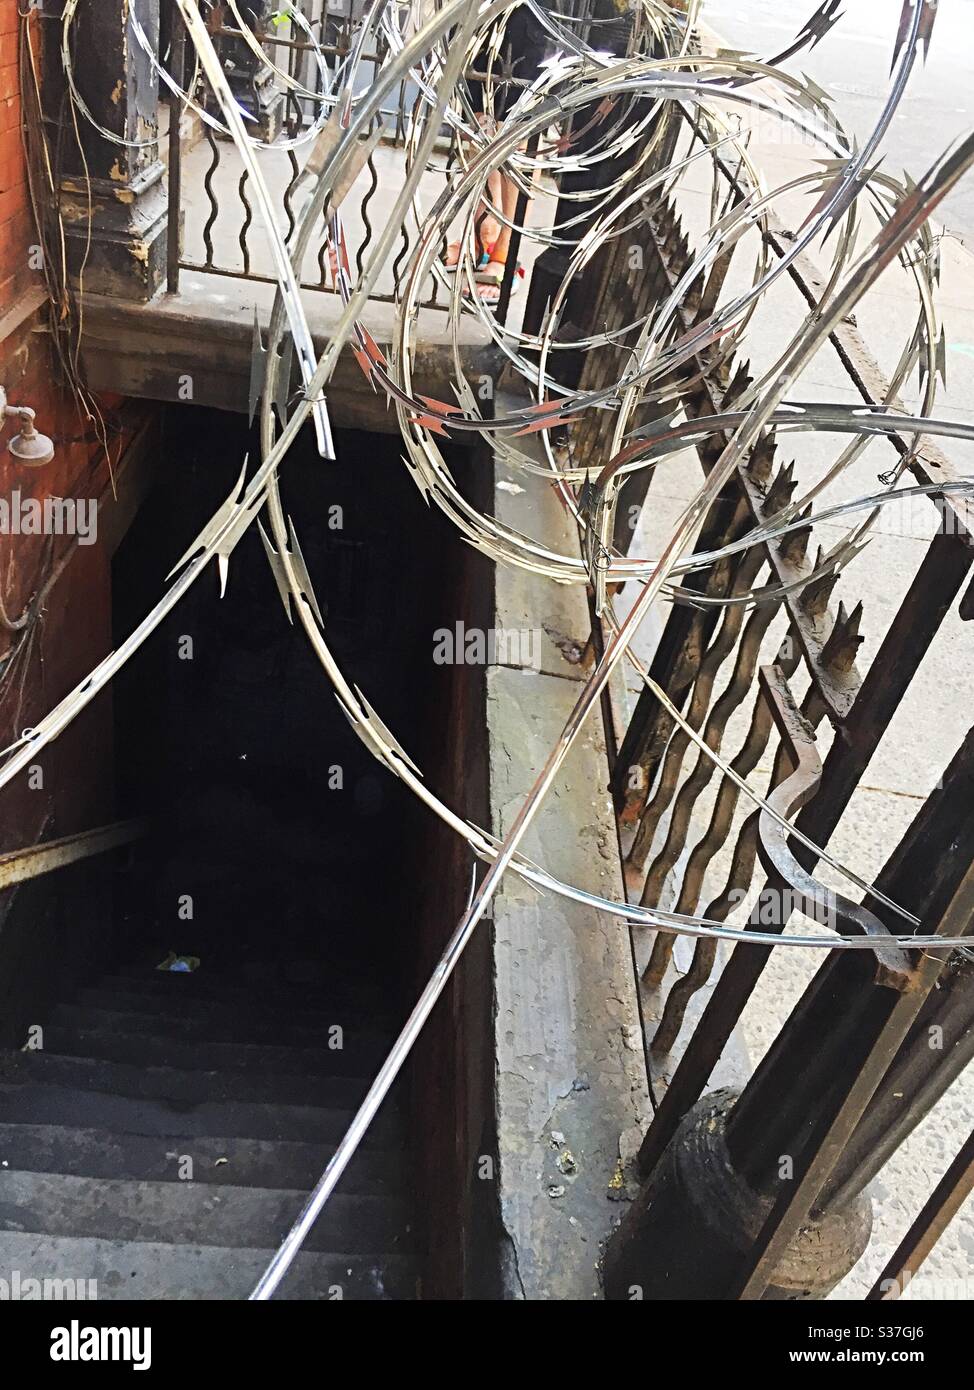 Concertina wire is a deterrent to illegal entry in buildings in midtown Manhattan, USA, NYC Stock Photo